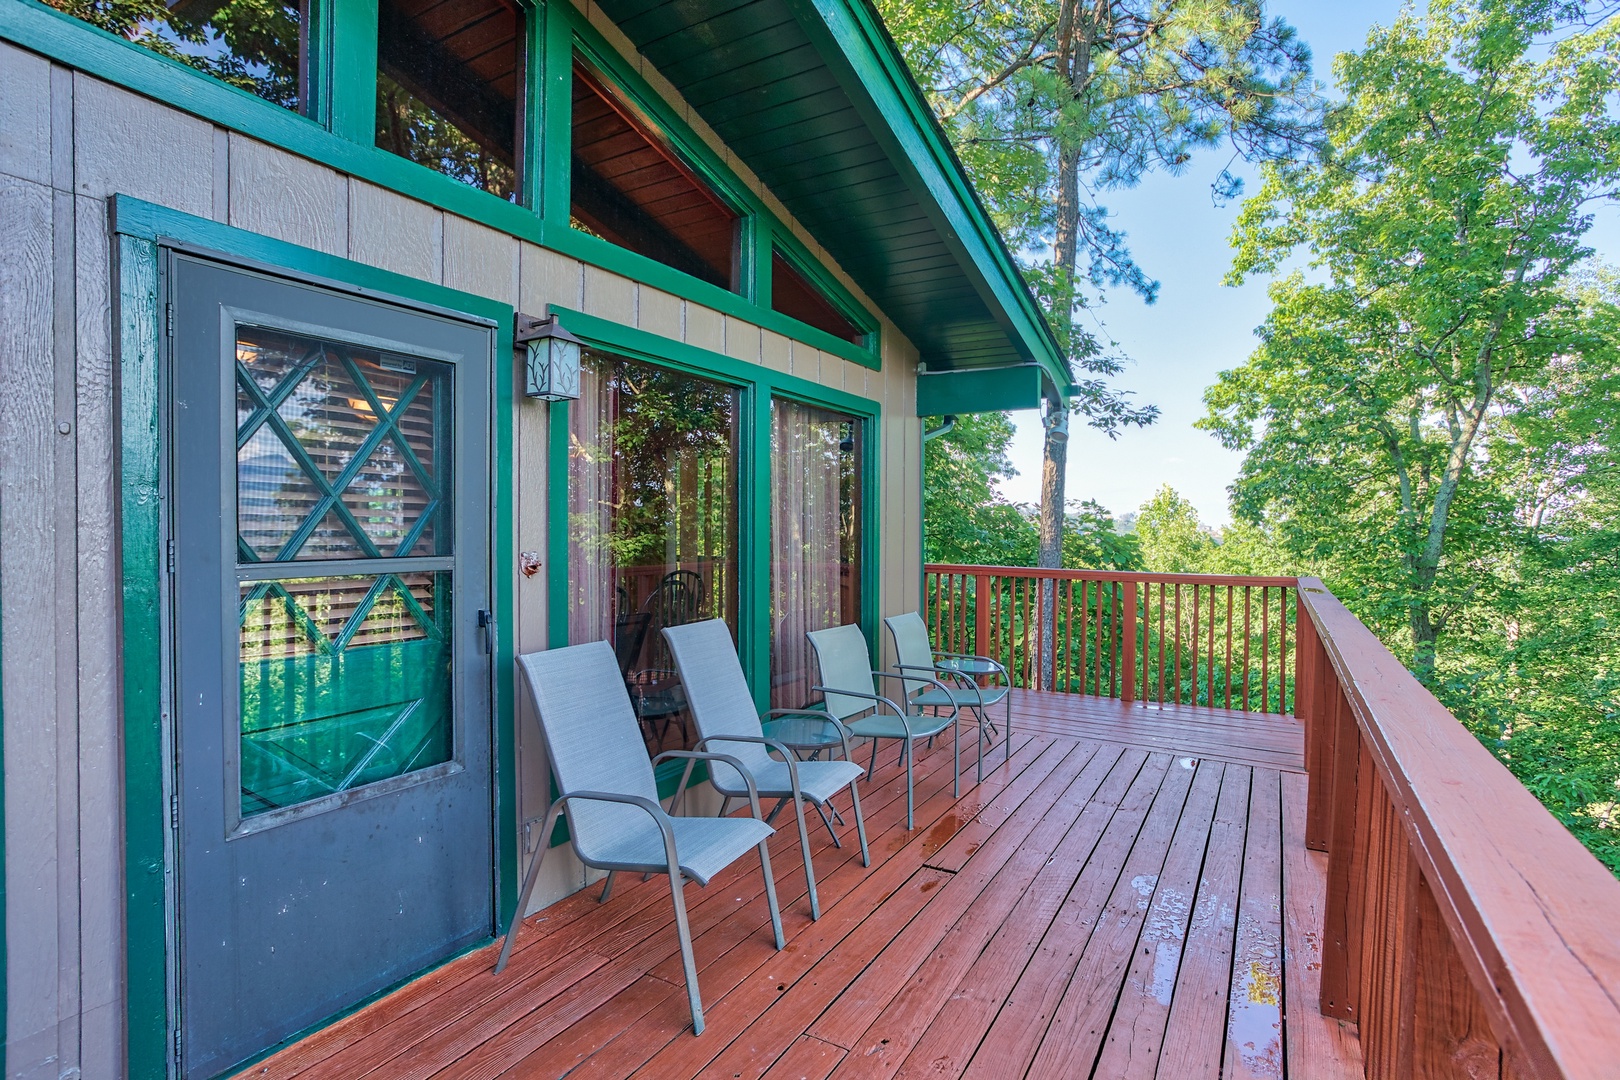 Main entrance and seating on the deck at Bushwood Lodge, a 3-bedroom cabin rental located in Gatlinburg